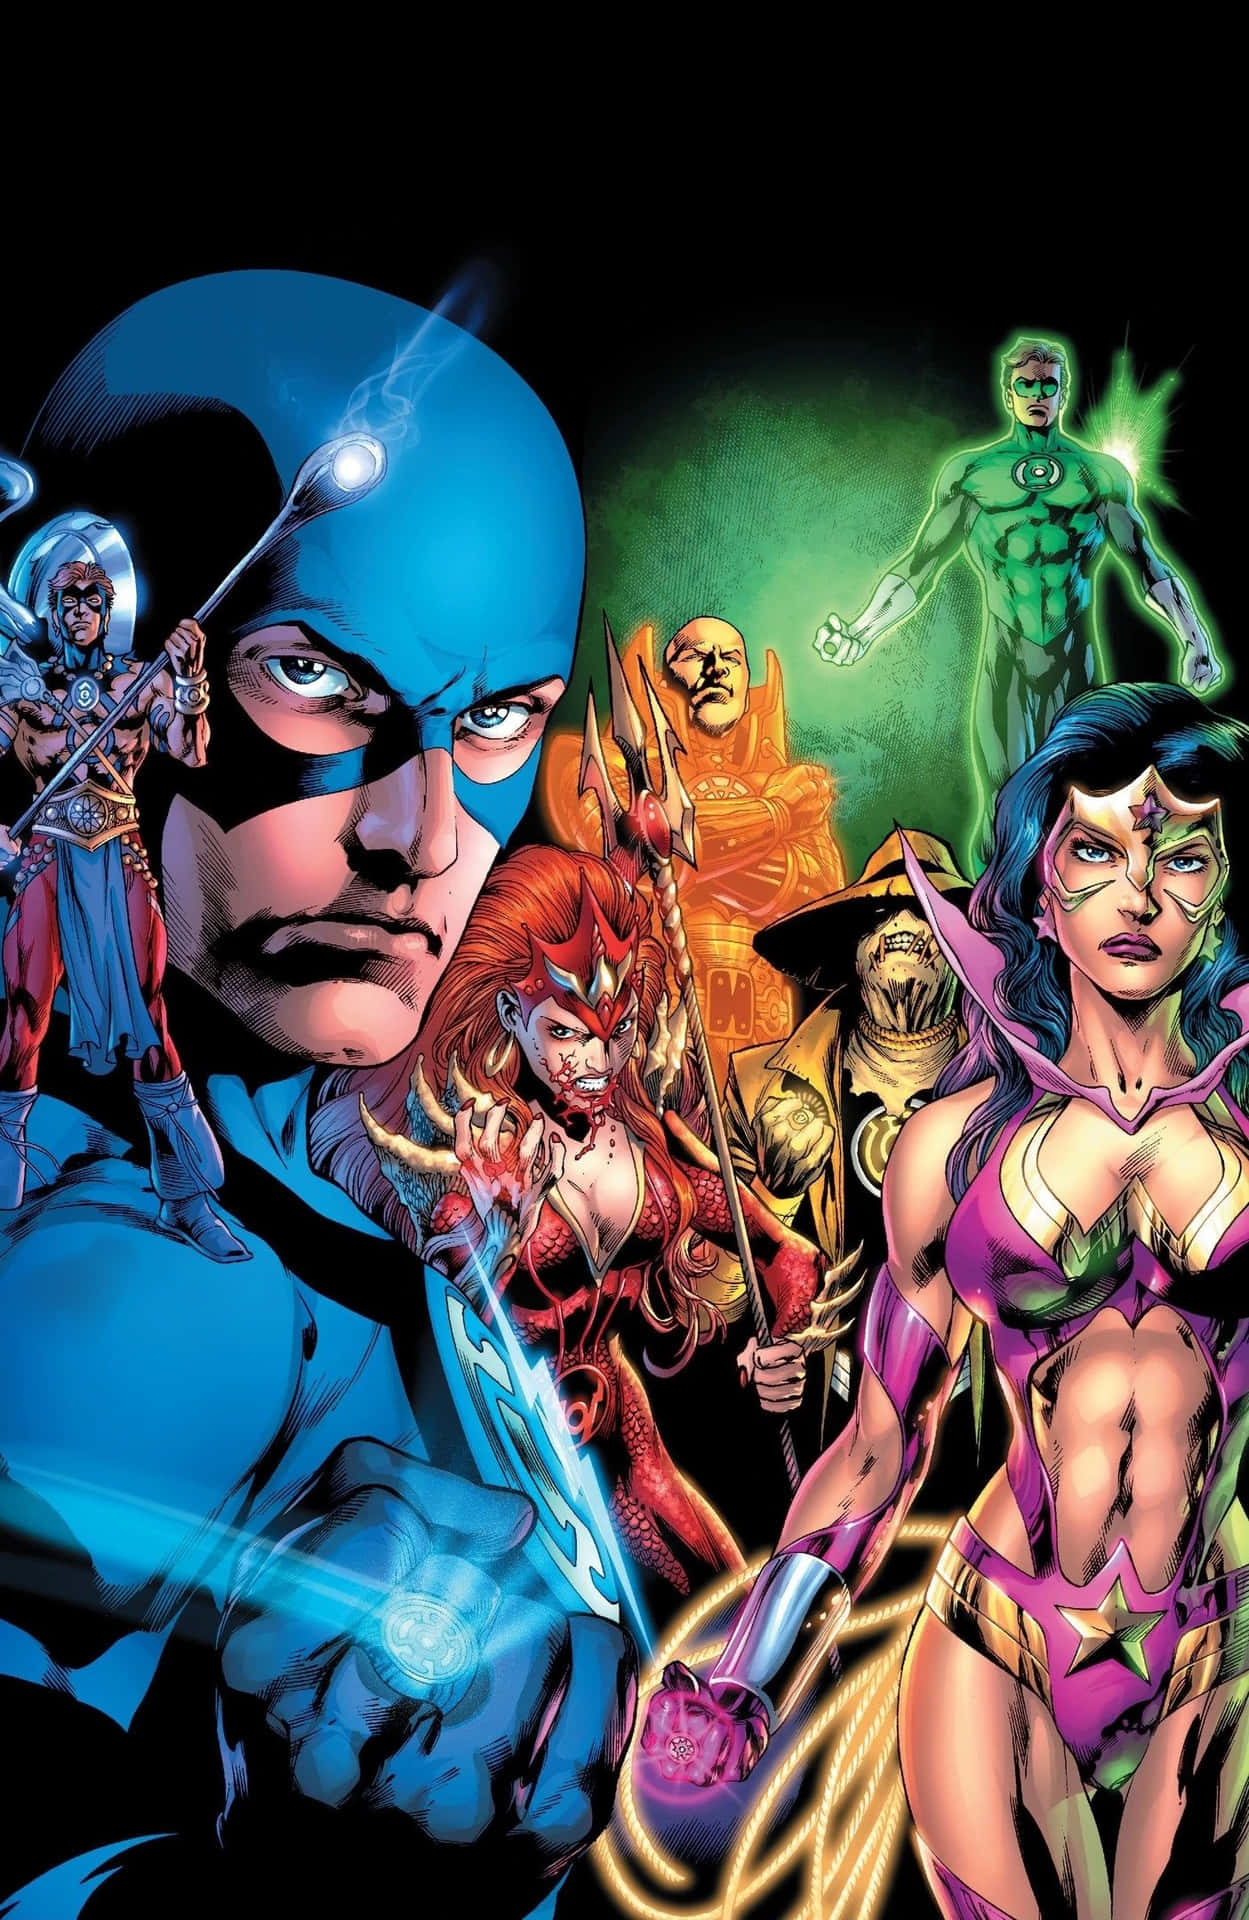 Rise up and accept your destiny in the "Blackest Night" Wallpaper